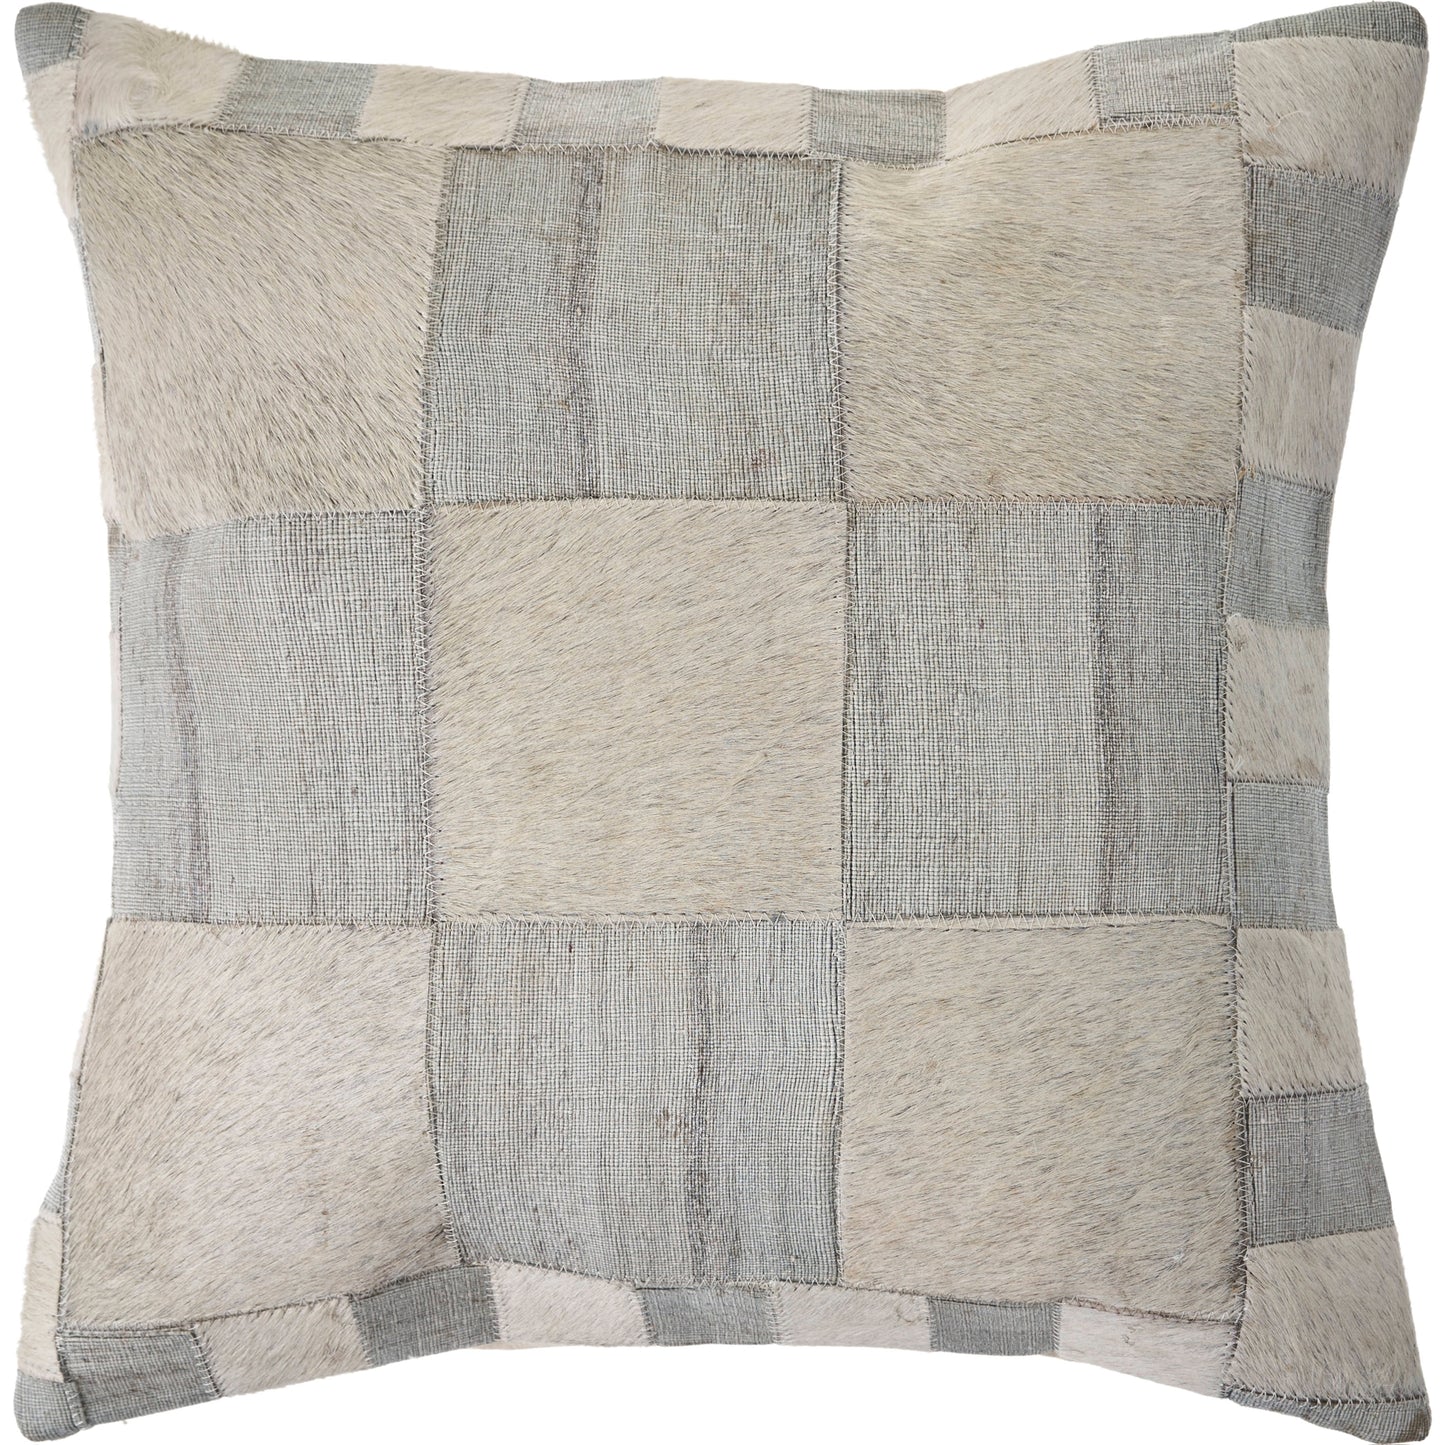 Silver and Gray Check Faux Leather Throw Pillow